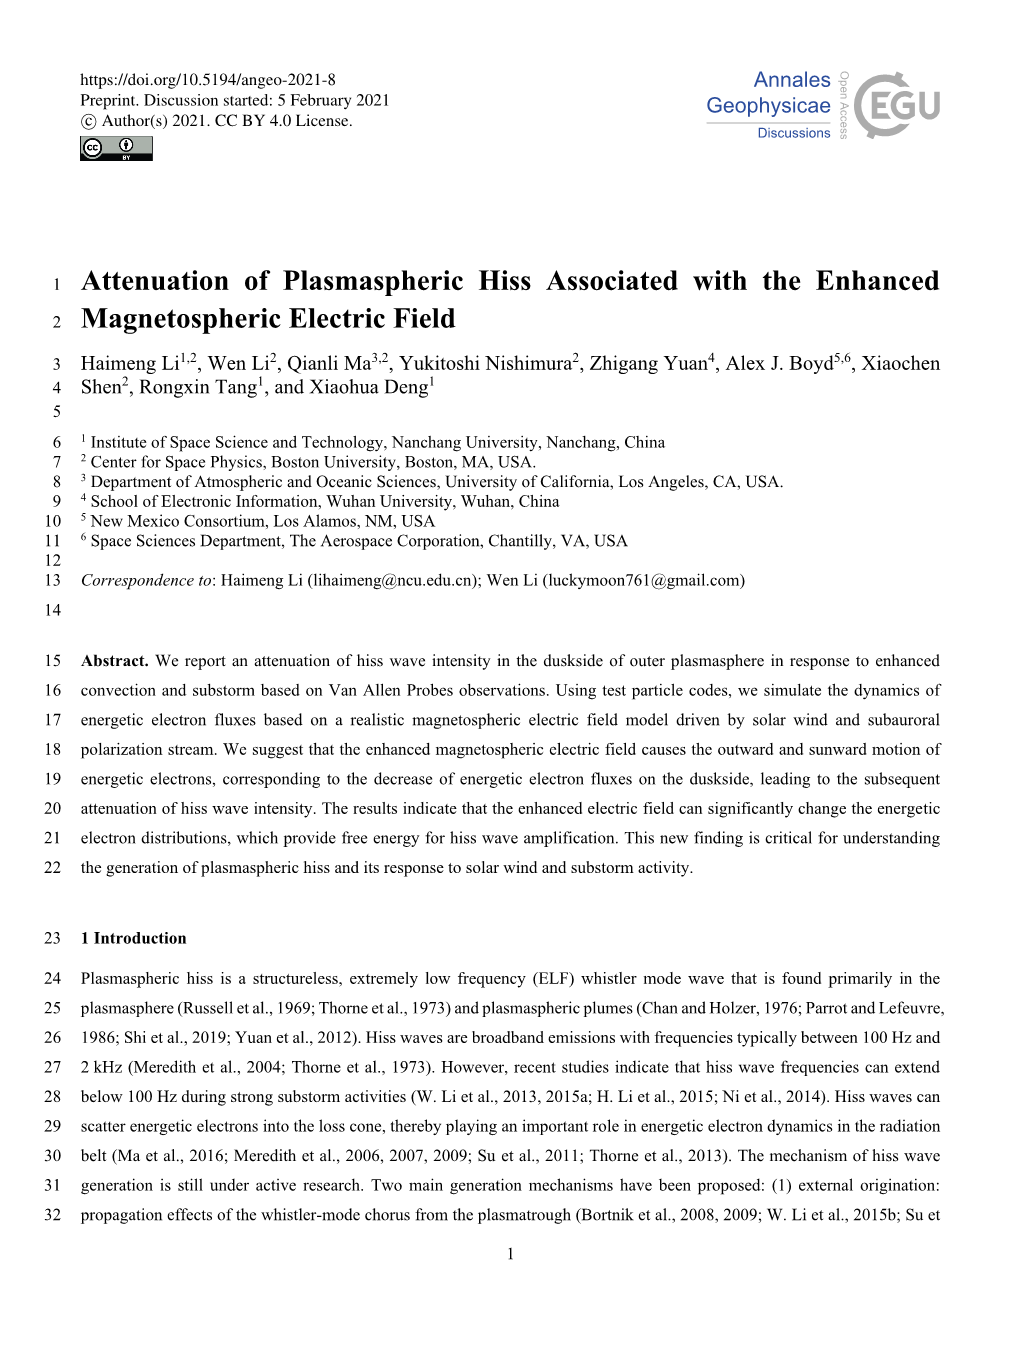 Attenuation of Plasmaspheric Hiss Associated with the Enhanced Magnetospheric Electric Field